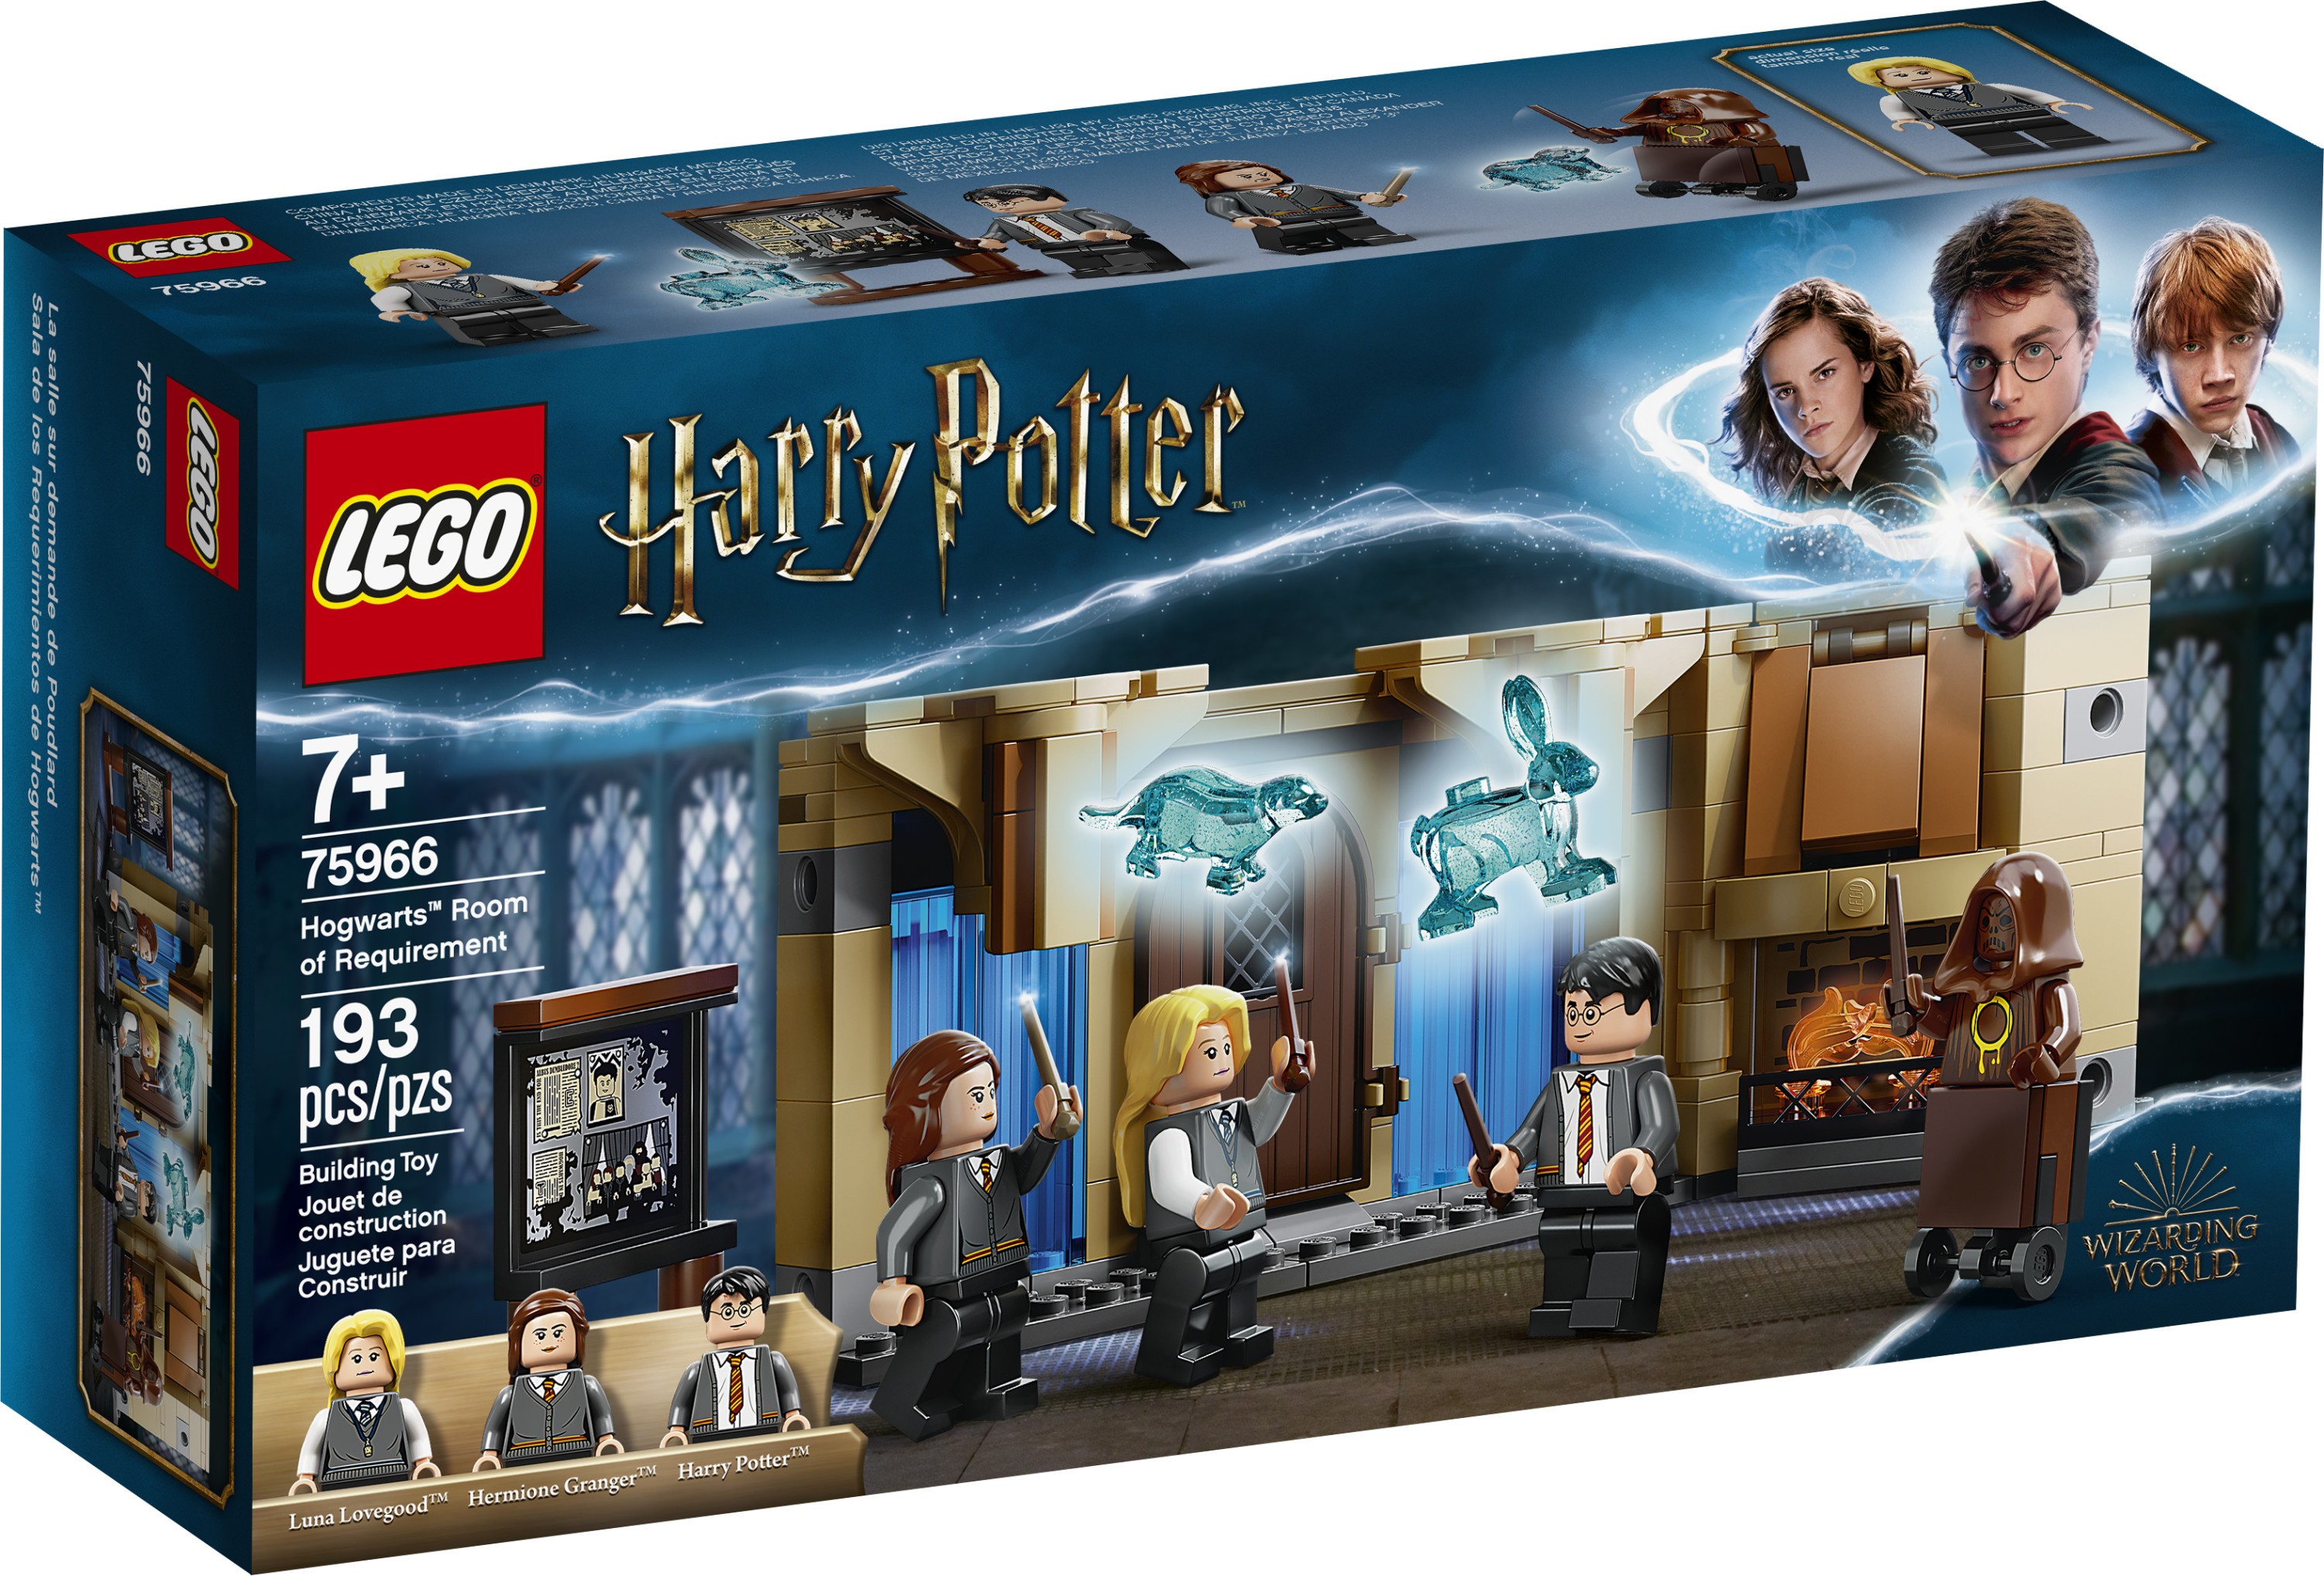 LEGO Hogwarts Room of Requirement 75966 Building Set (193 Pieces) - image 5 of 8